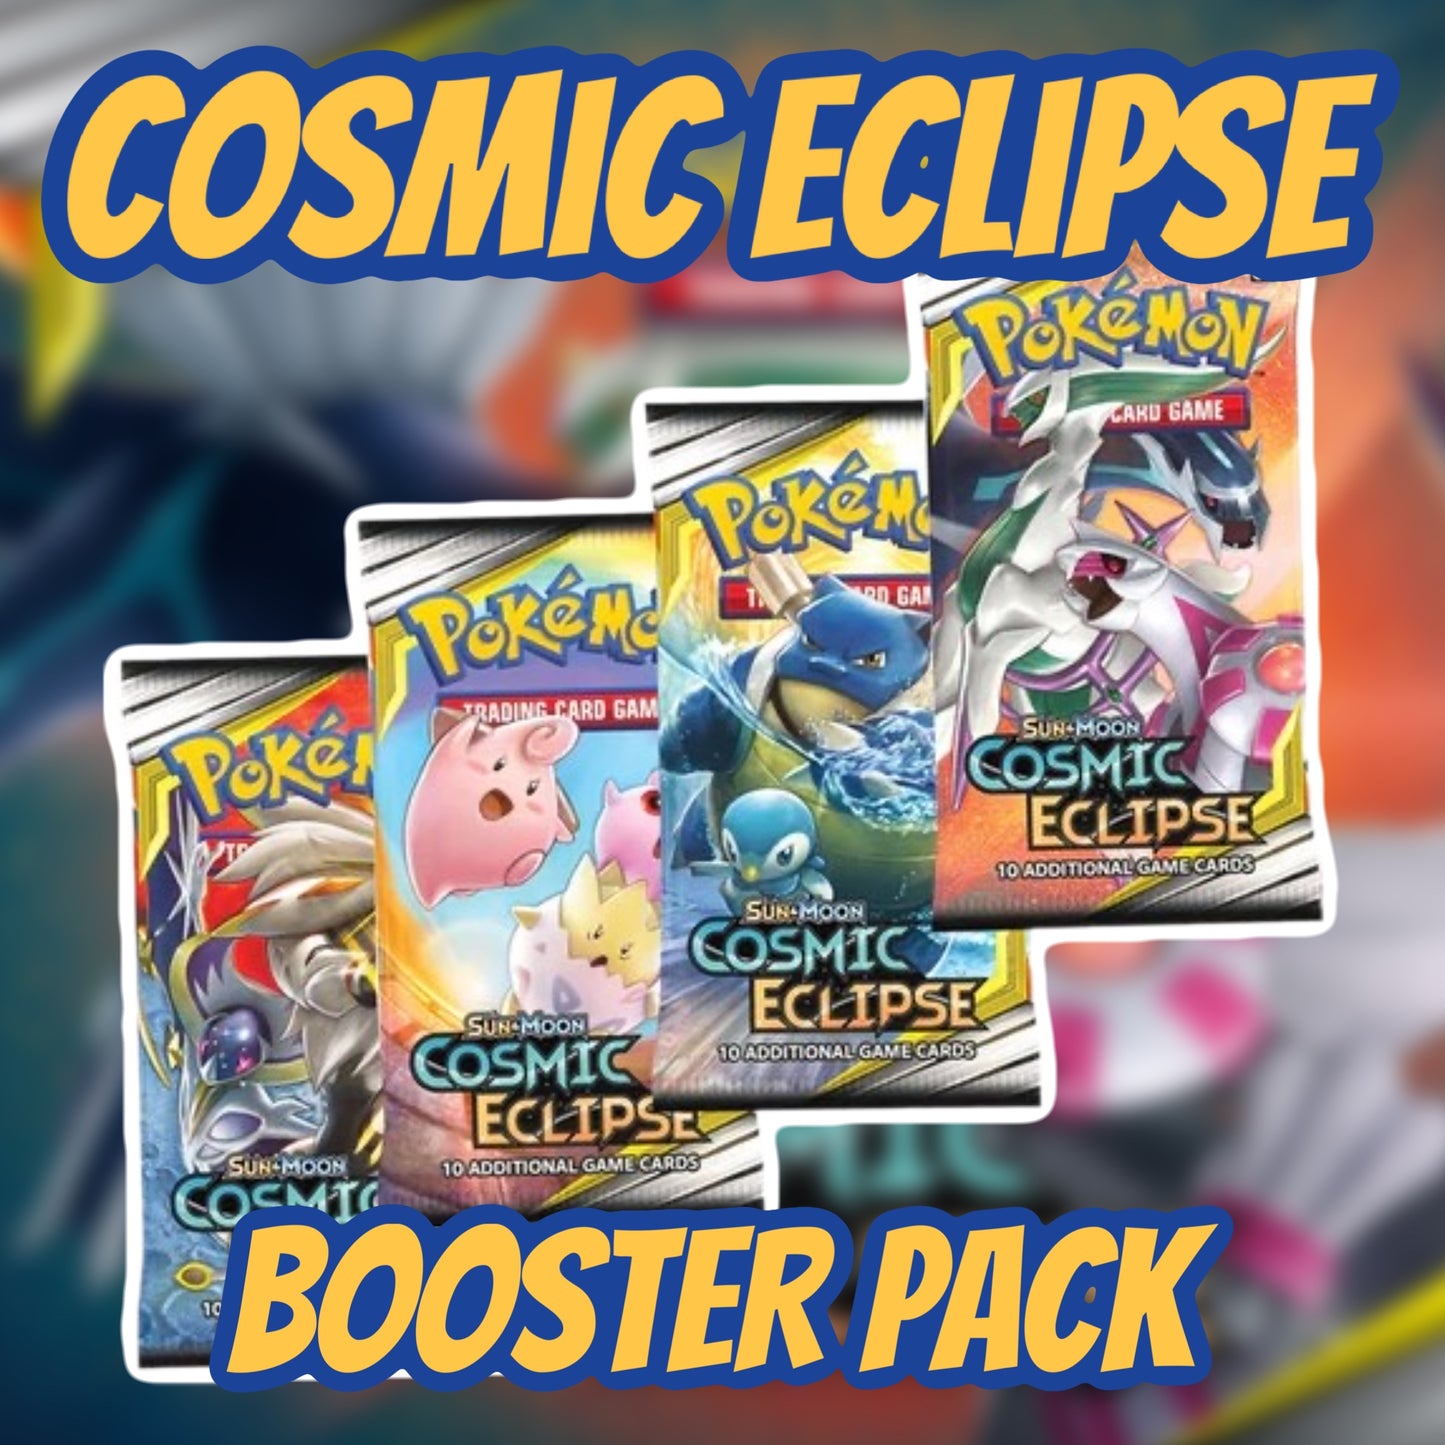 Cosmic Eclipse Booster Pack (1 Pack)